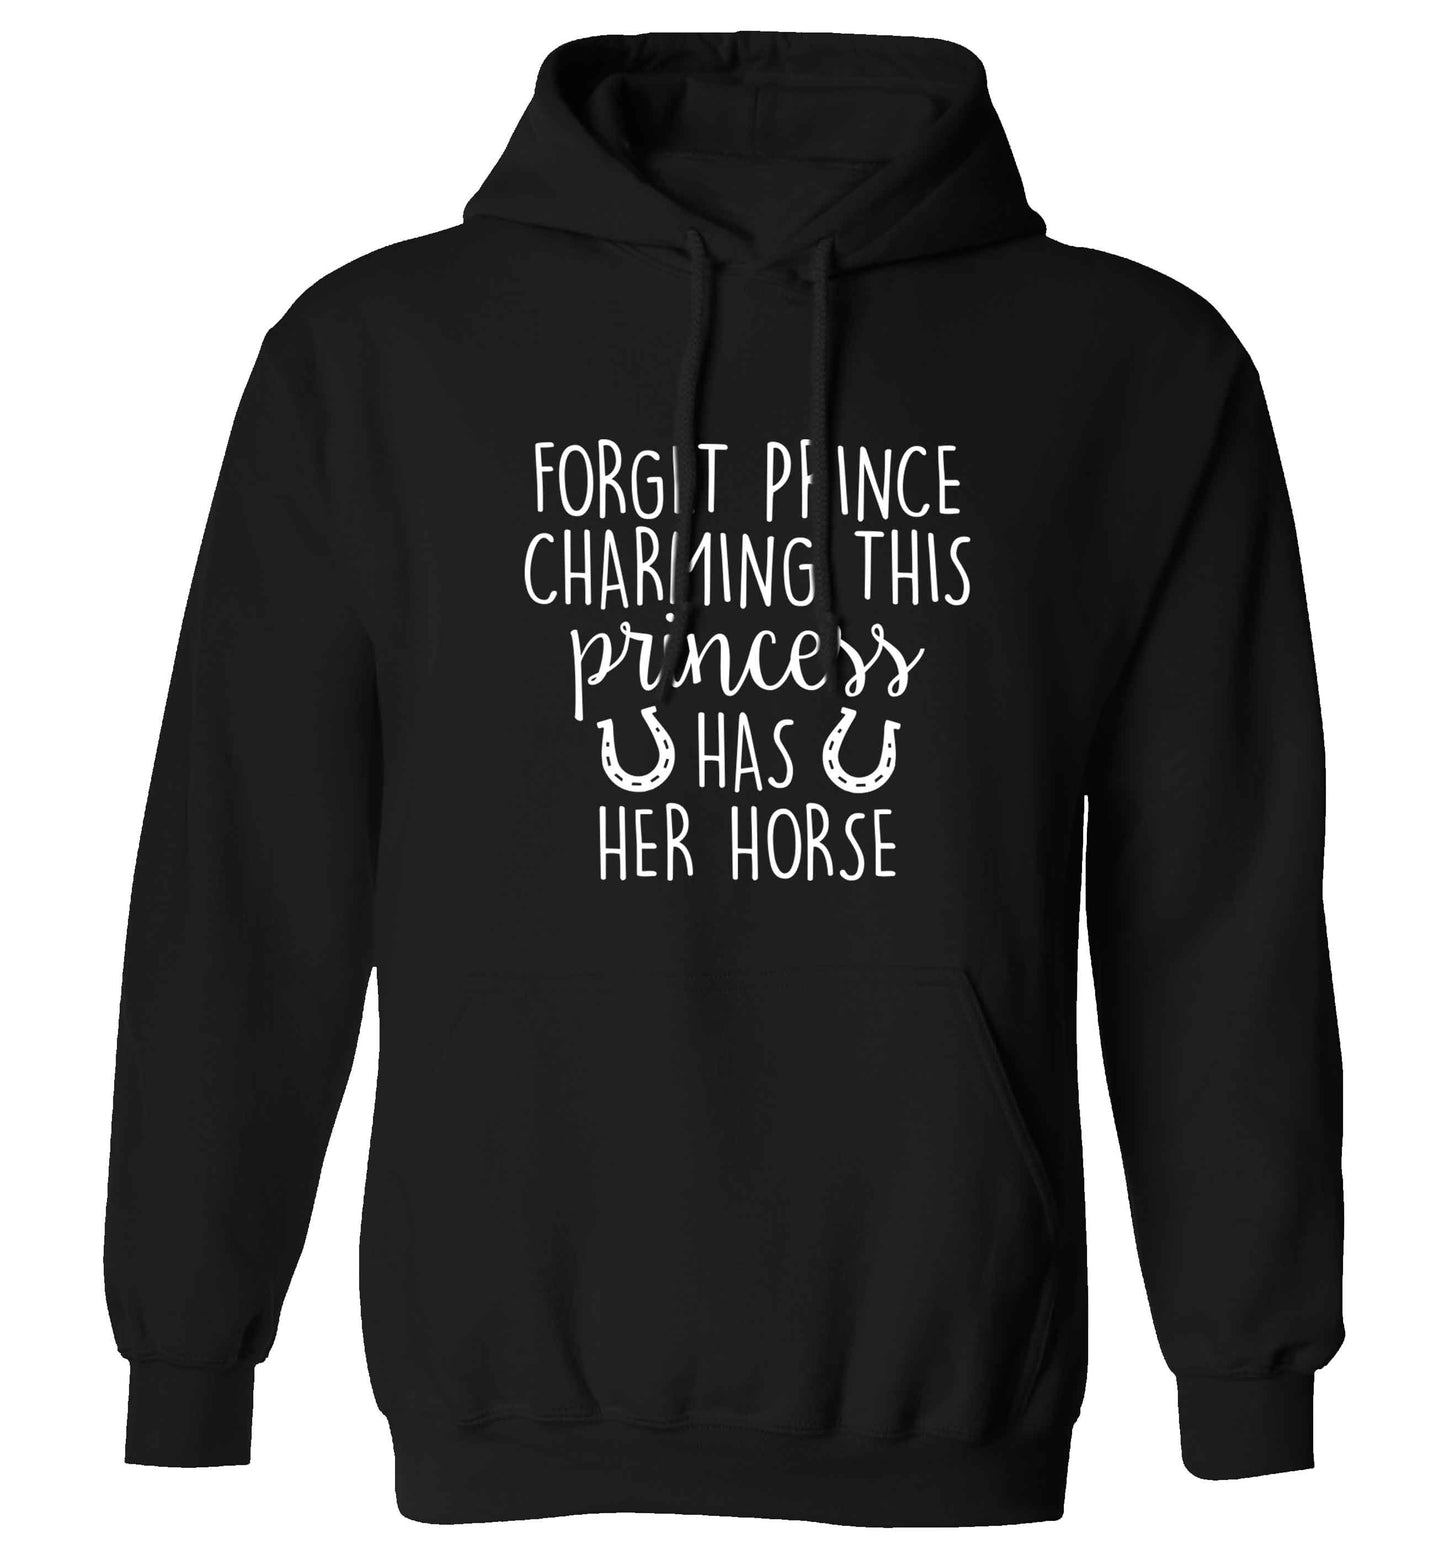 Forget prince charming this princess has her horse adults unisex black hoodie 2XL